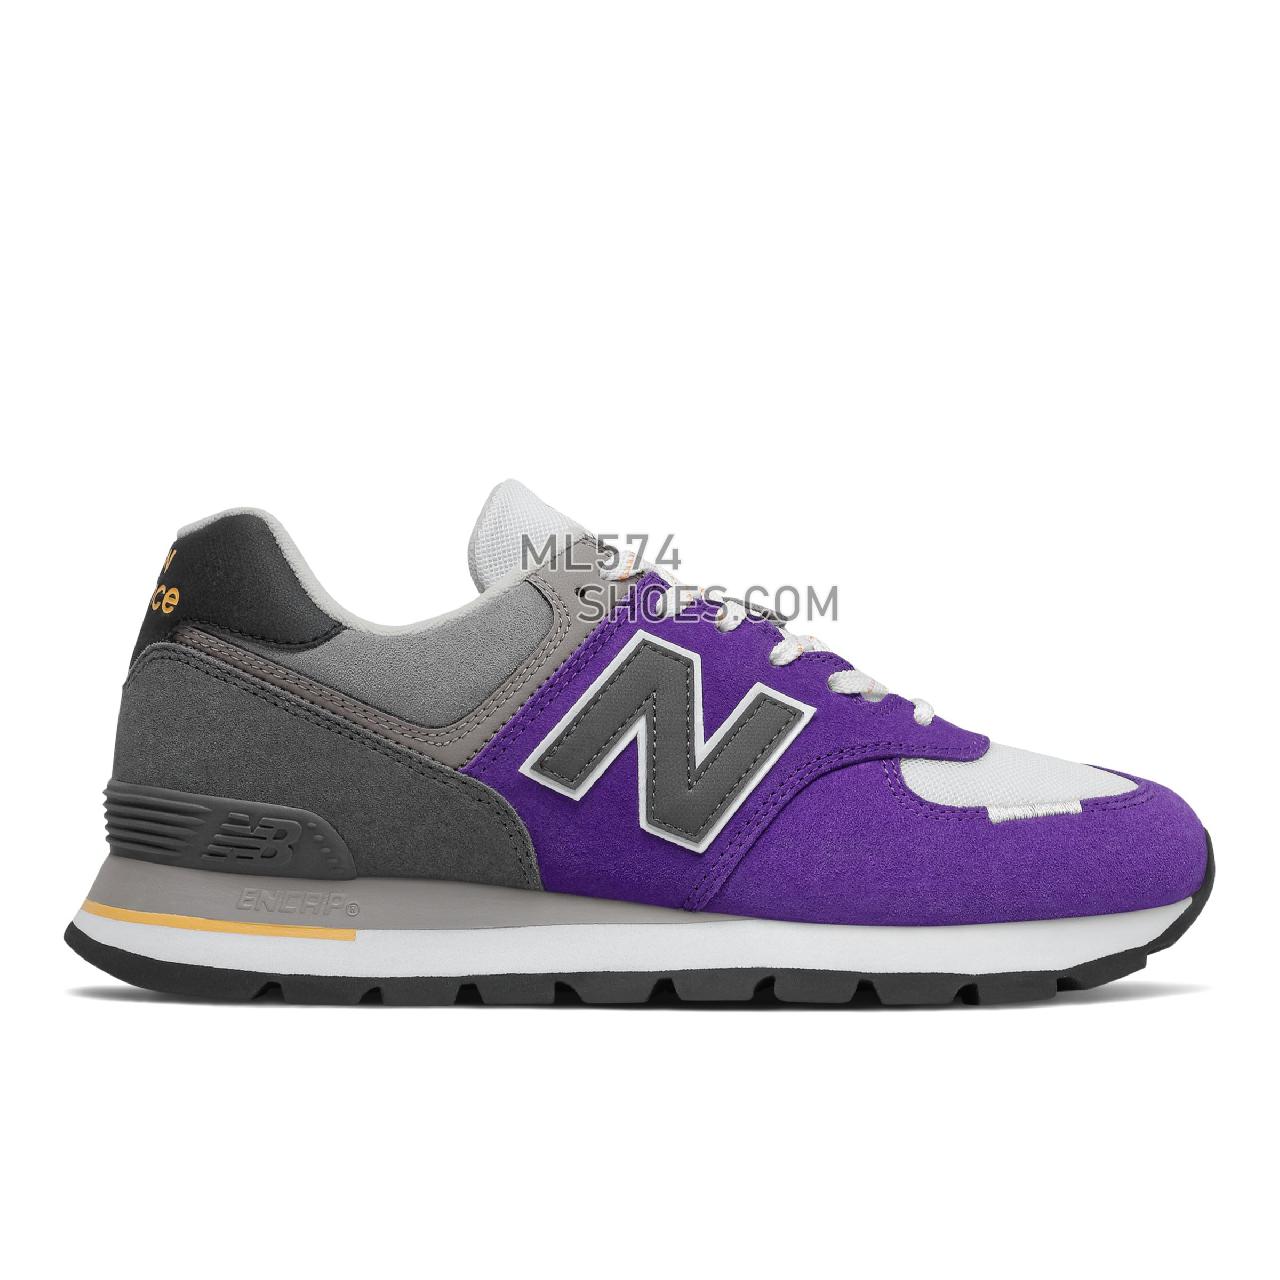 New Balance 574 Rugged - Men's Classic Sneakers - Prism Purple with Marblehead - ML574DTB